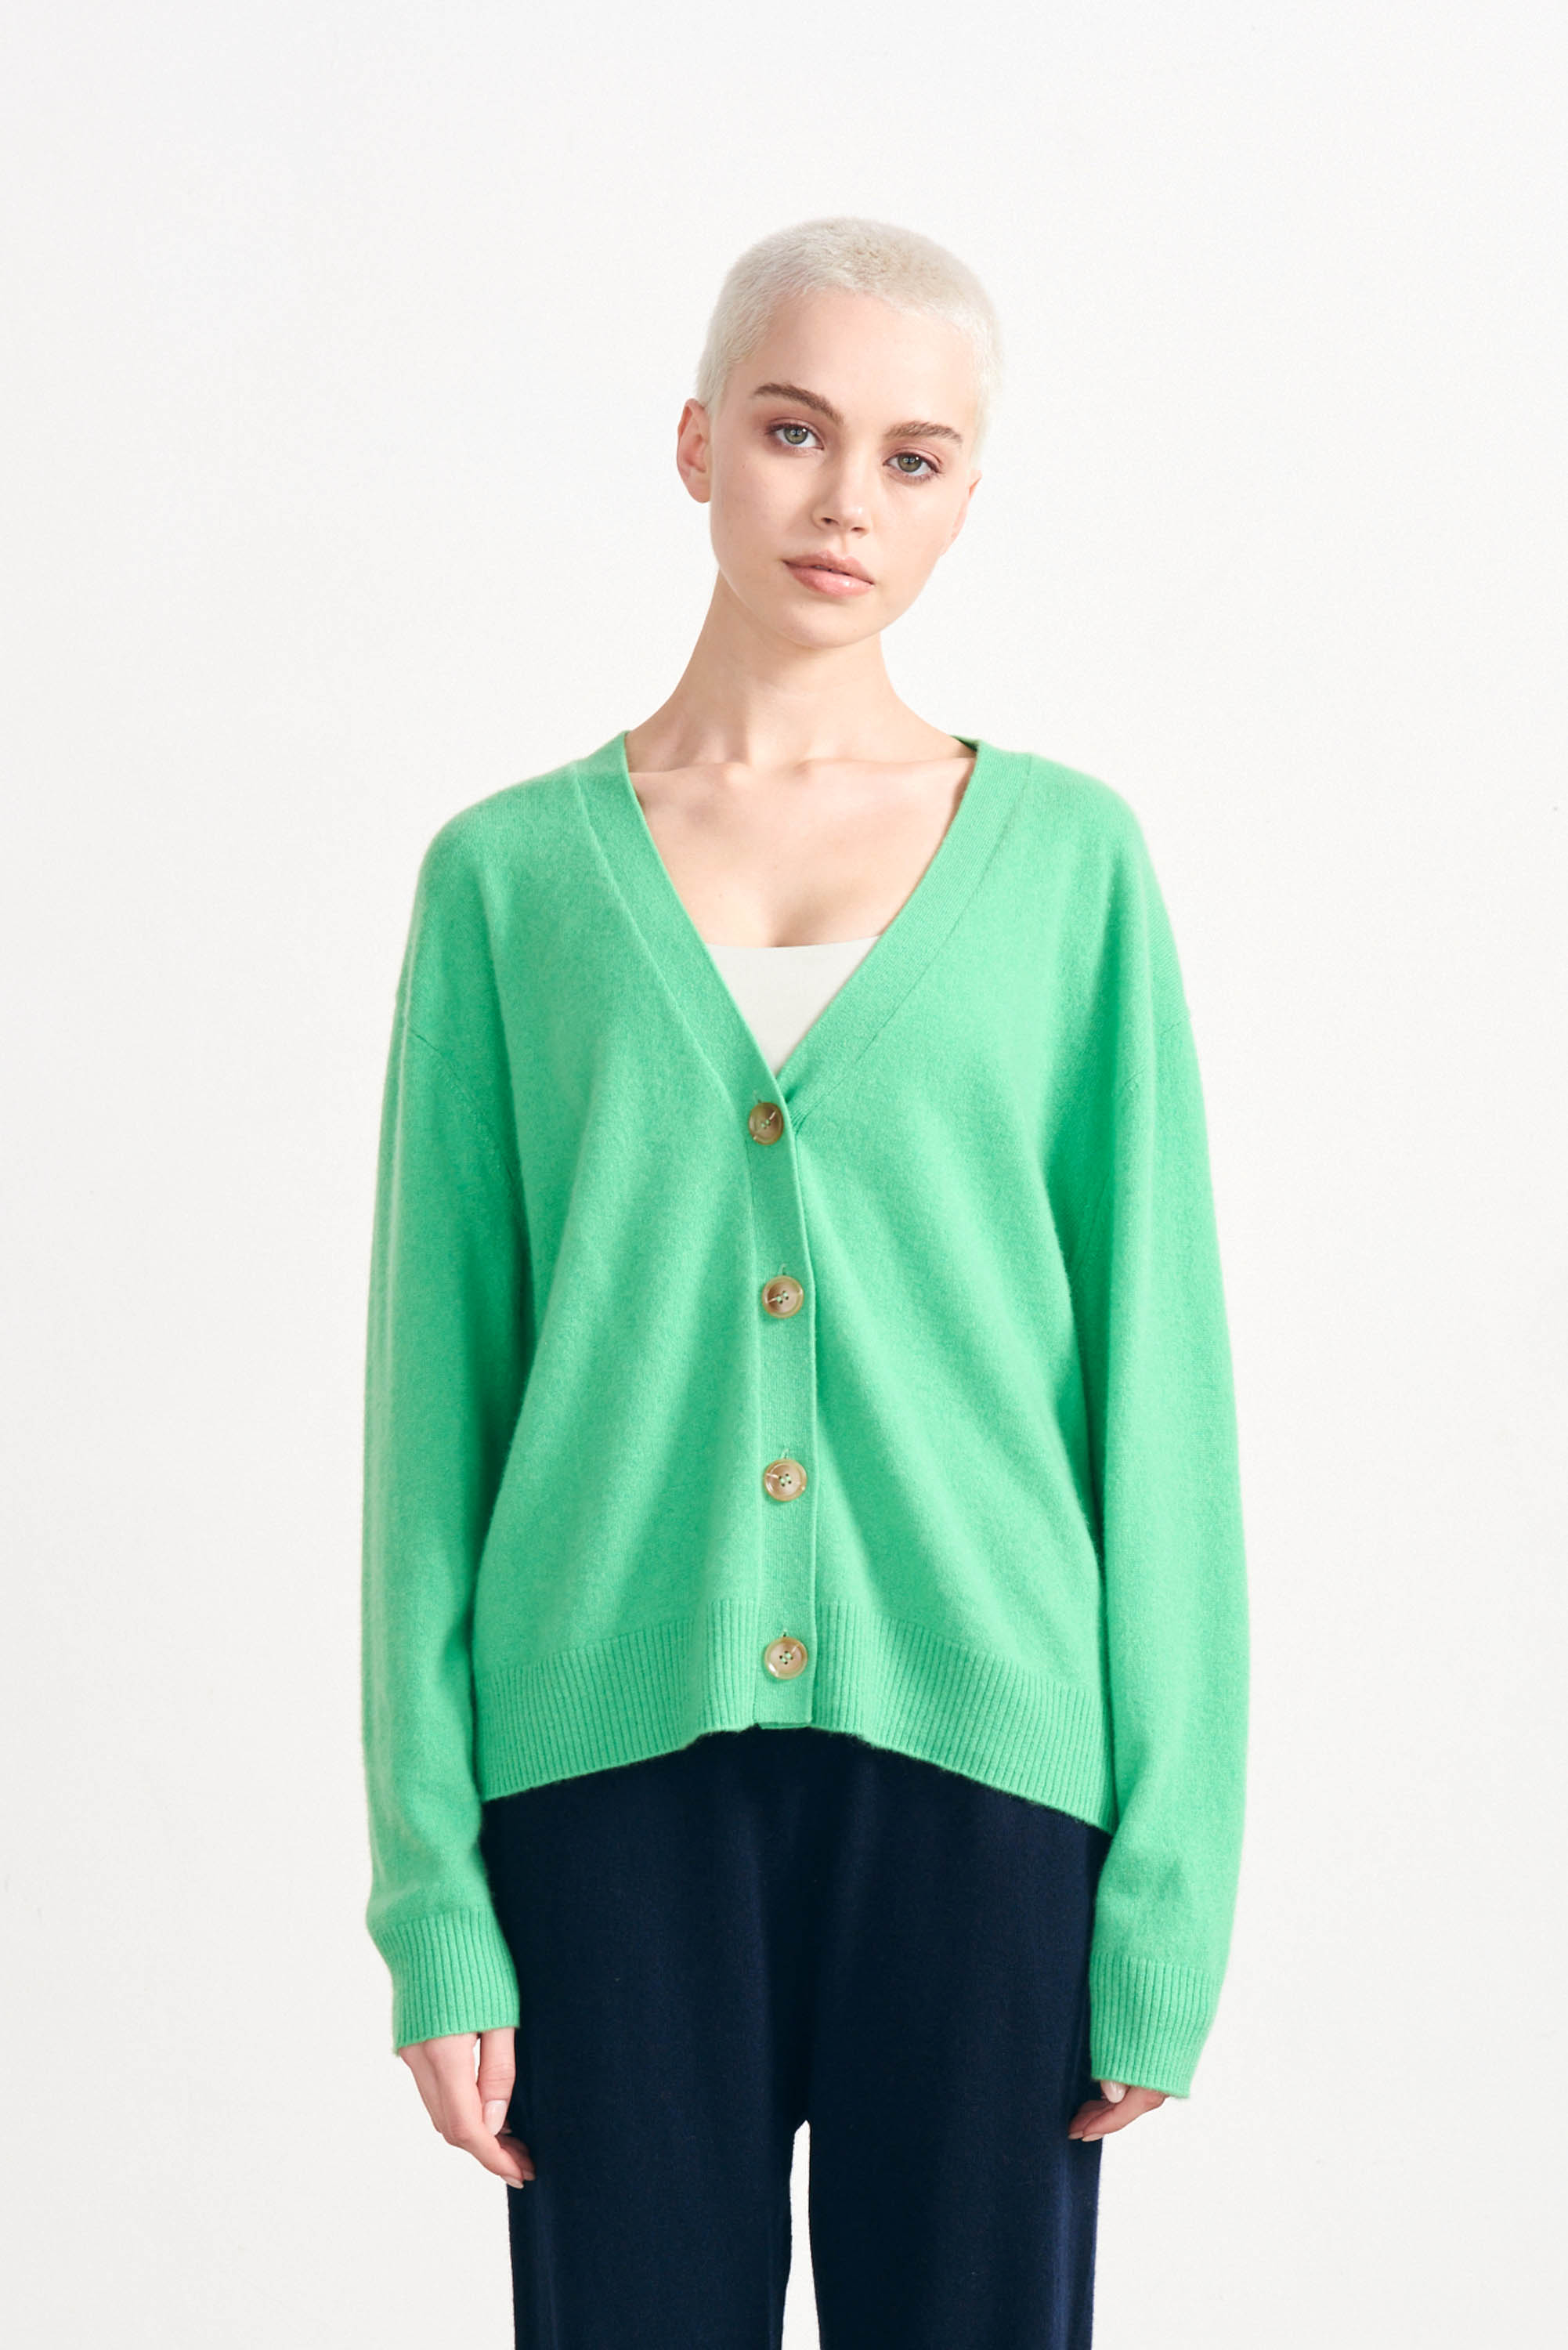 Blonde female model wearing Jumper1234 Bright green cashmere vee neck cardigan with pink love heart 'hello' intarsia on the back